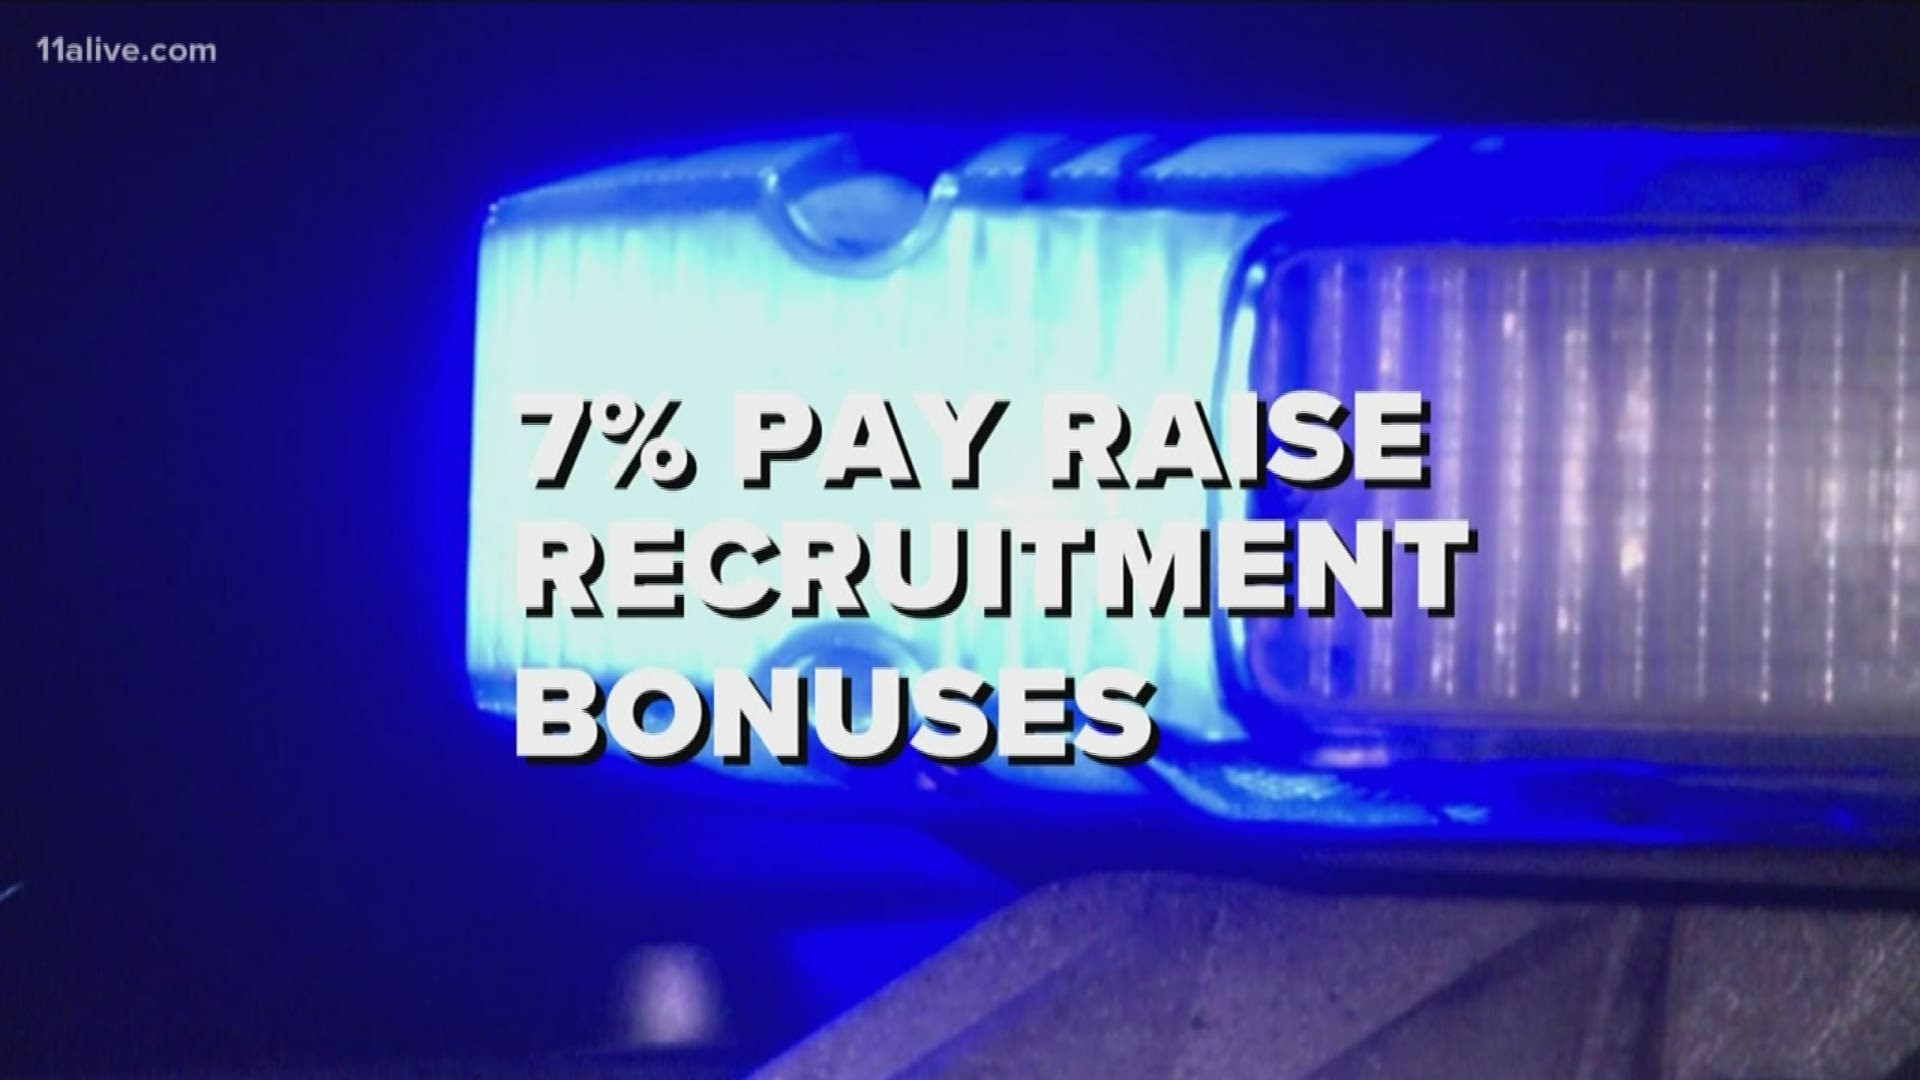 The fiscal year 2020 budget provides a 7 percent raise for public safety personnel.